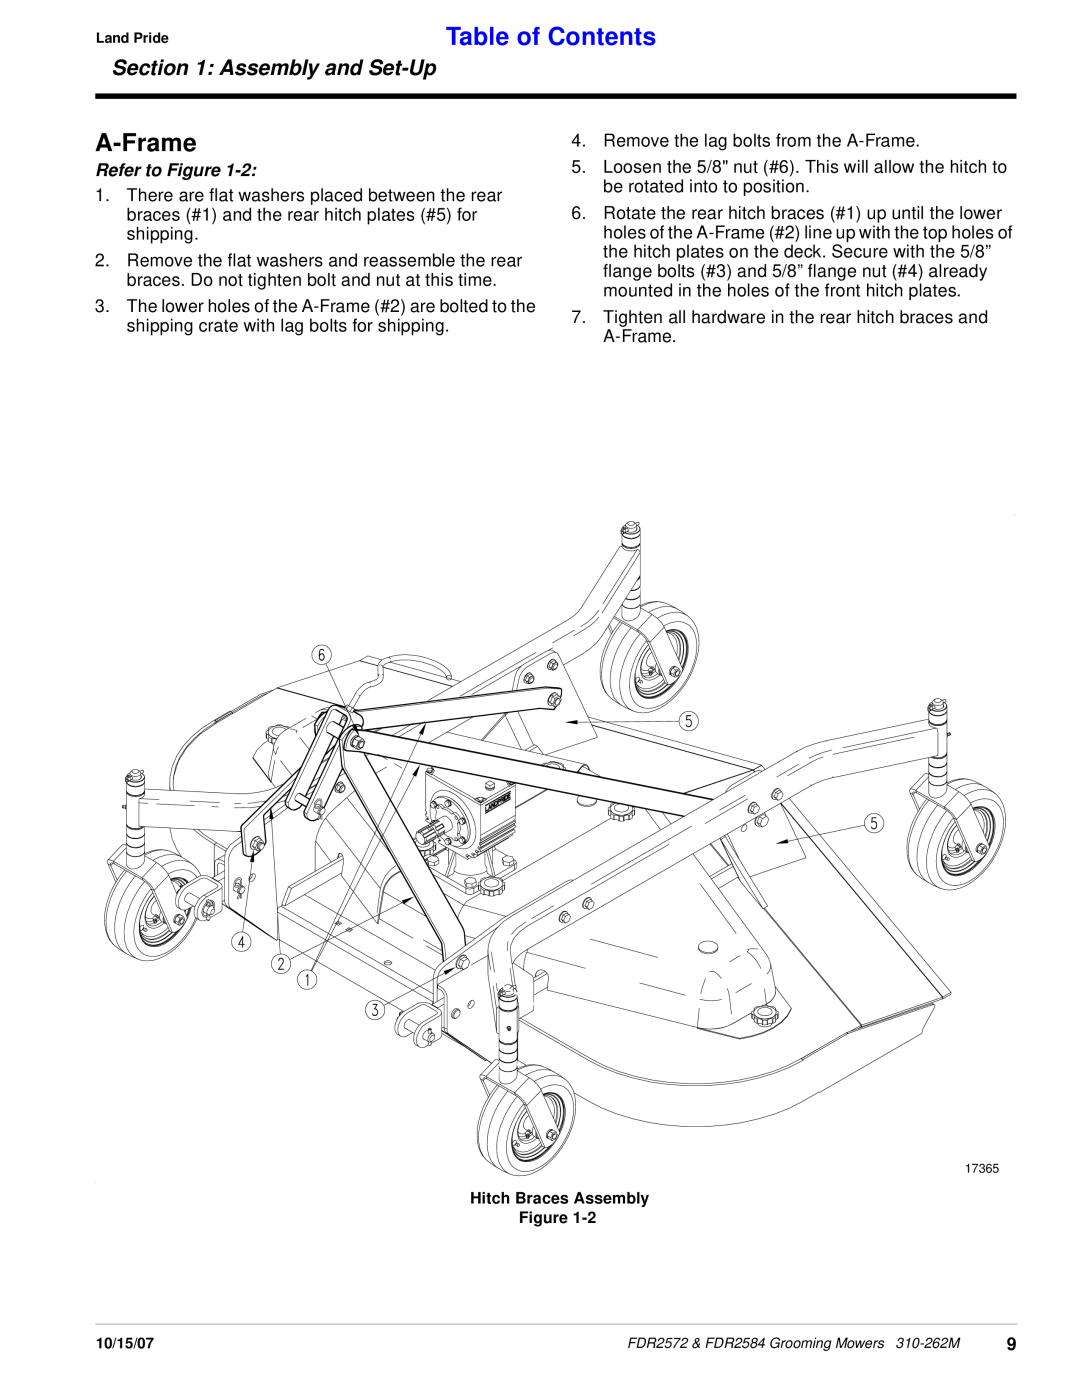 Land Pride FDR2584, FDR2572 manual A-Frame, Table of Contents, Assembly and Set-Up, Refer to Figure 